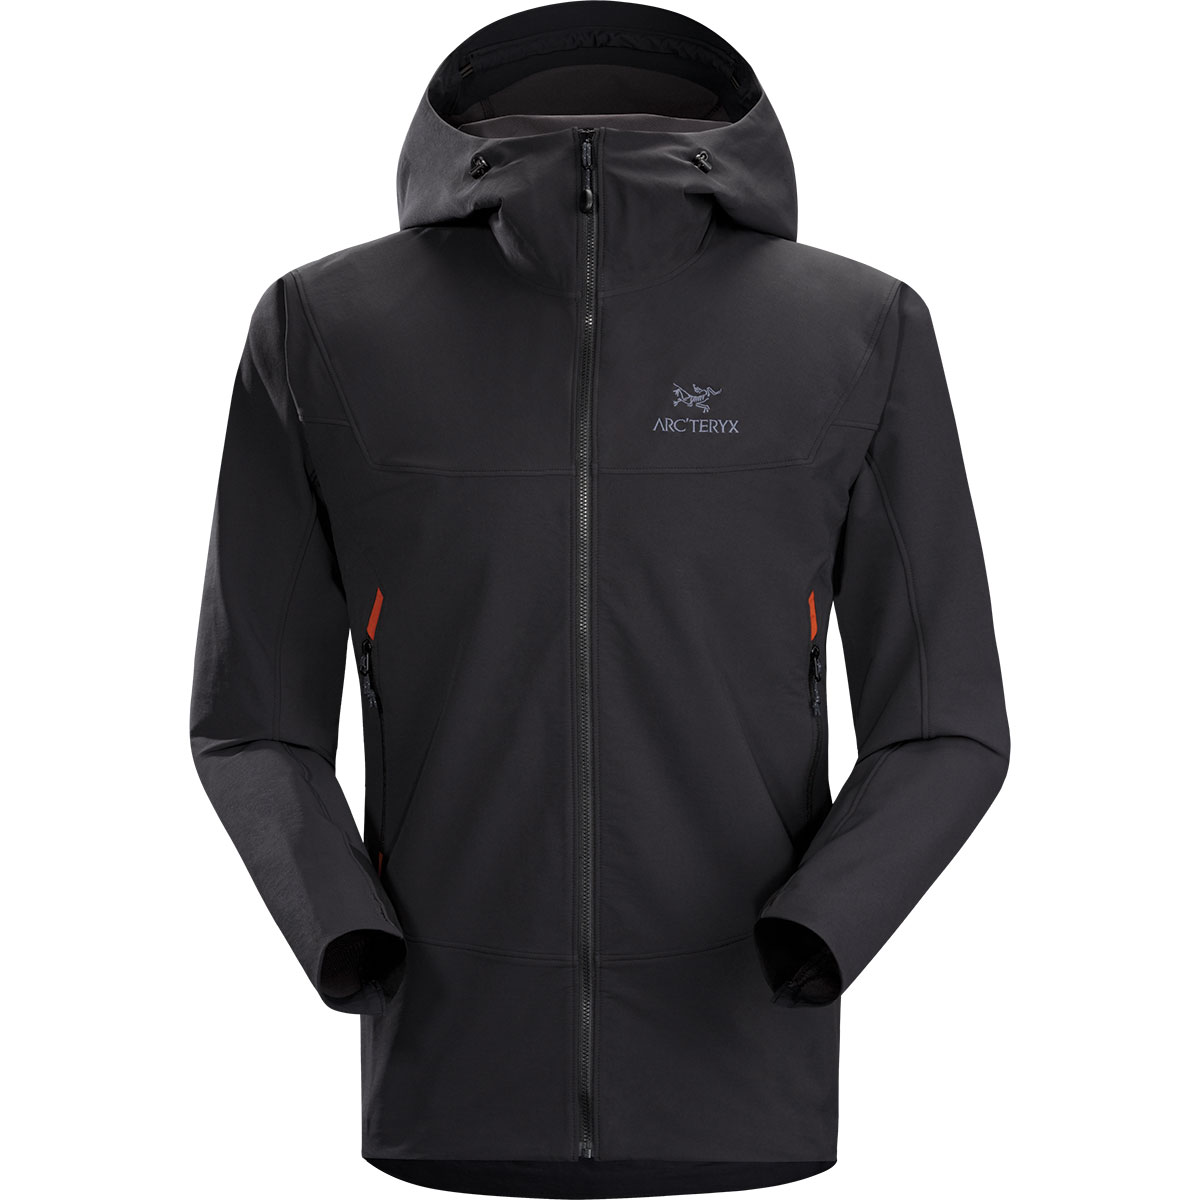 Arc'teryx Gamma LT Hoody, men's, discontinued Fall 2018 colors (free ground  shipping) :: Softshell Jackets :: Jackets :: Clothing :: Moontrail